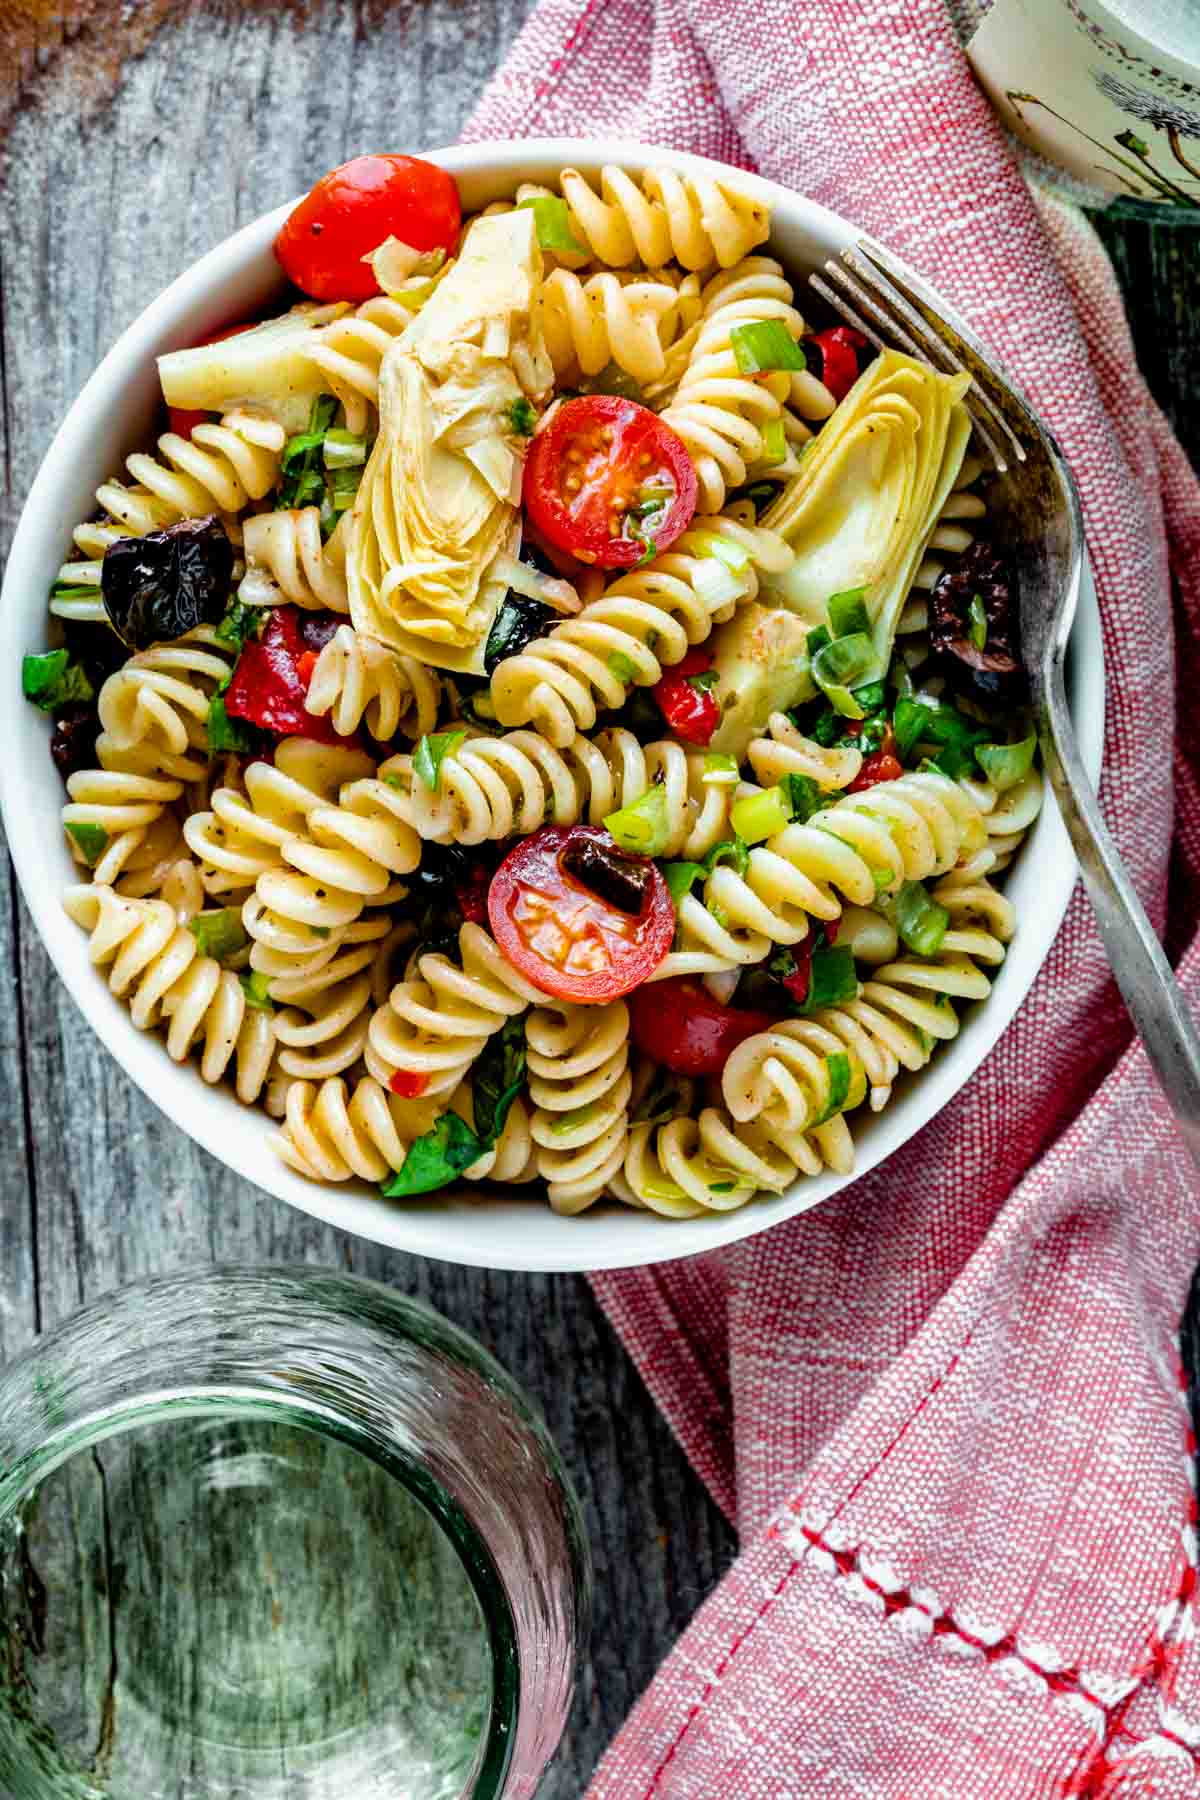 the pasta salad with artichoke hearts and cherry tomatoes in a small bowl on a red napkin